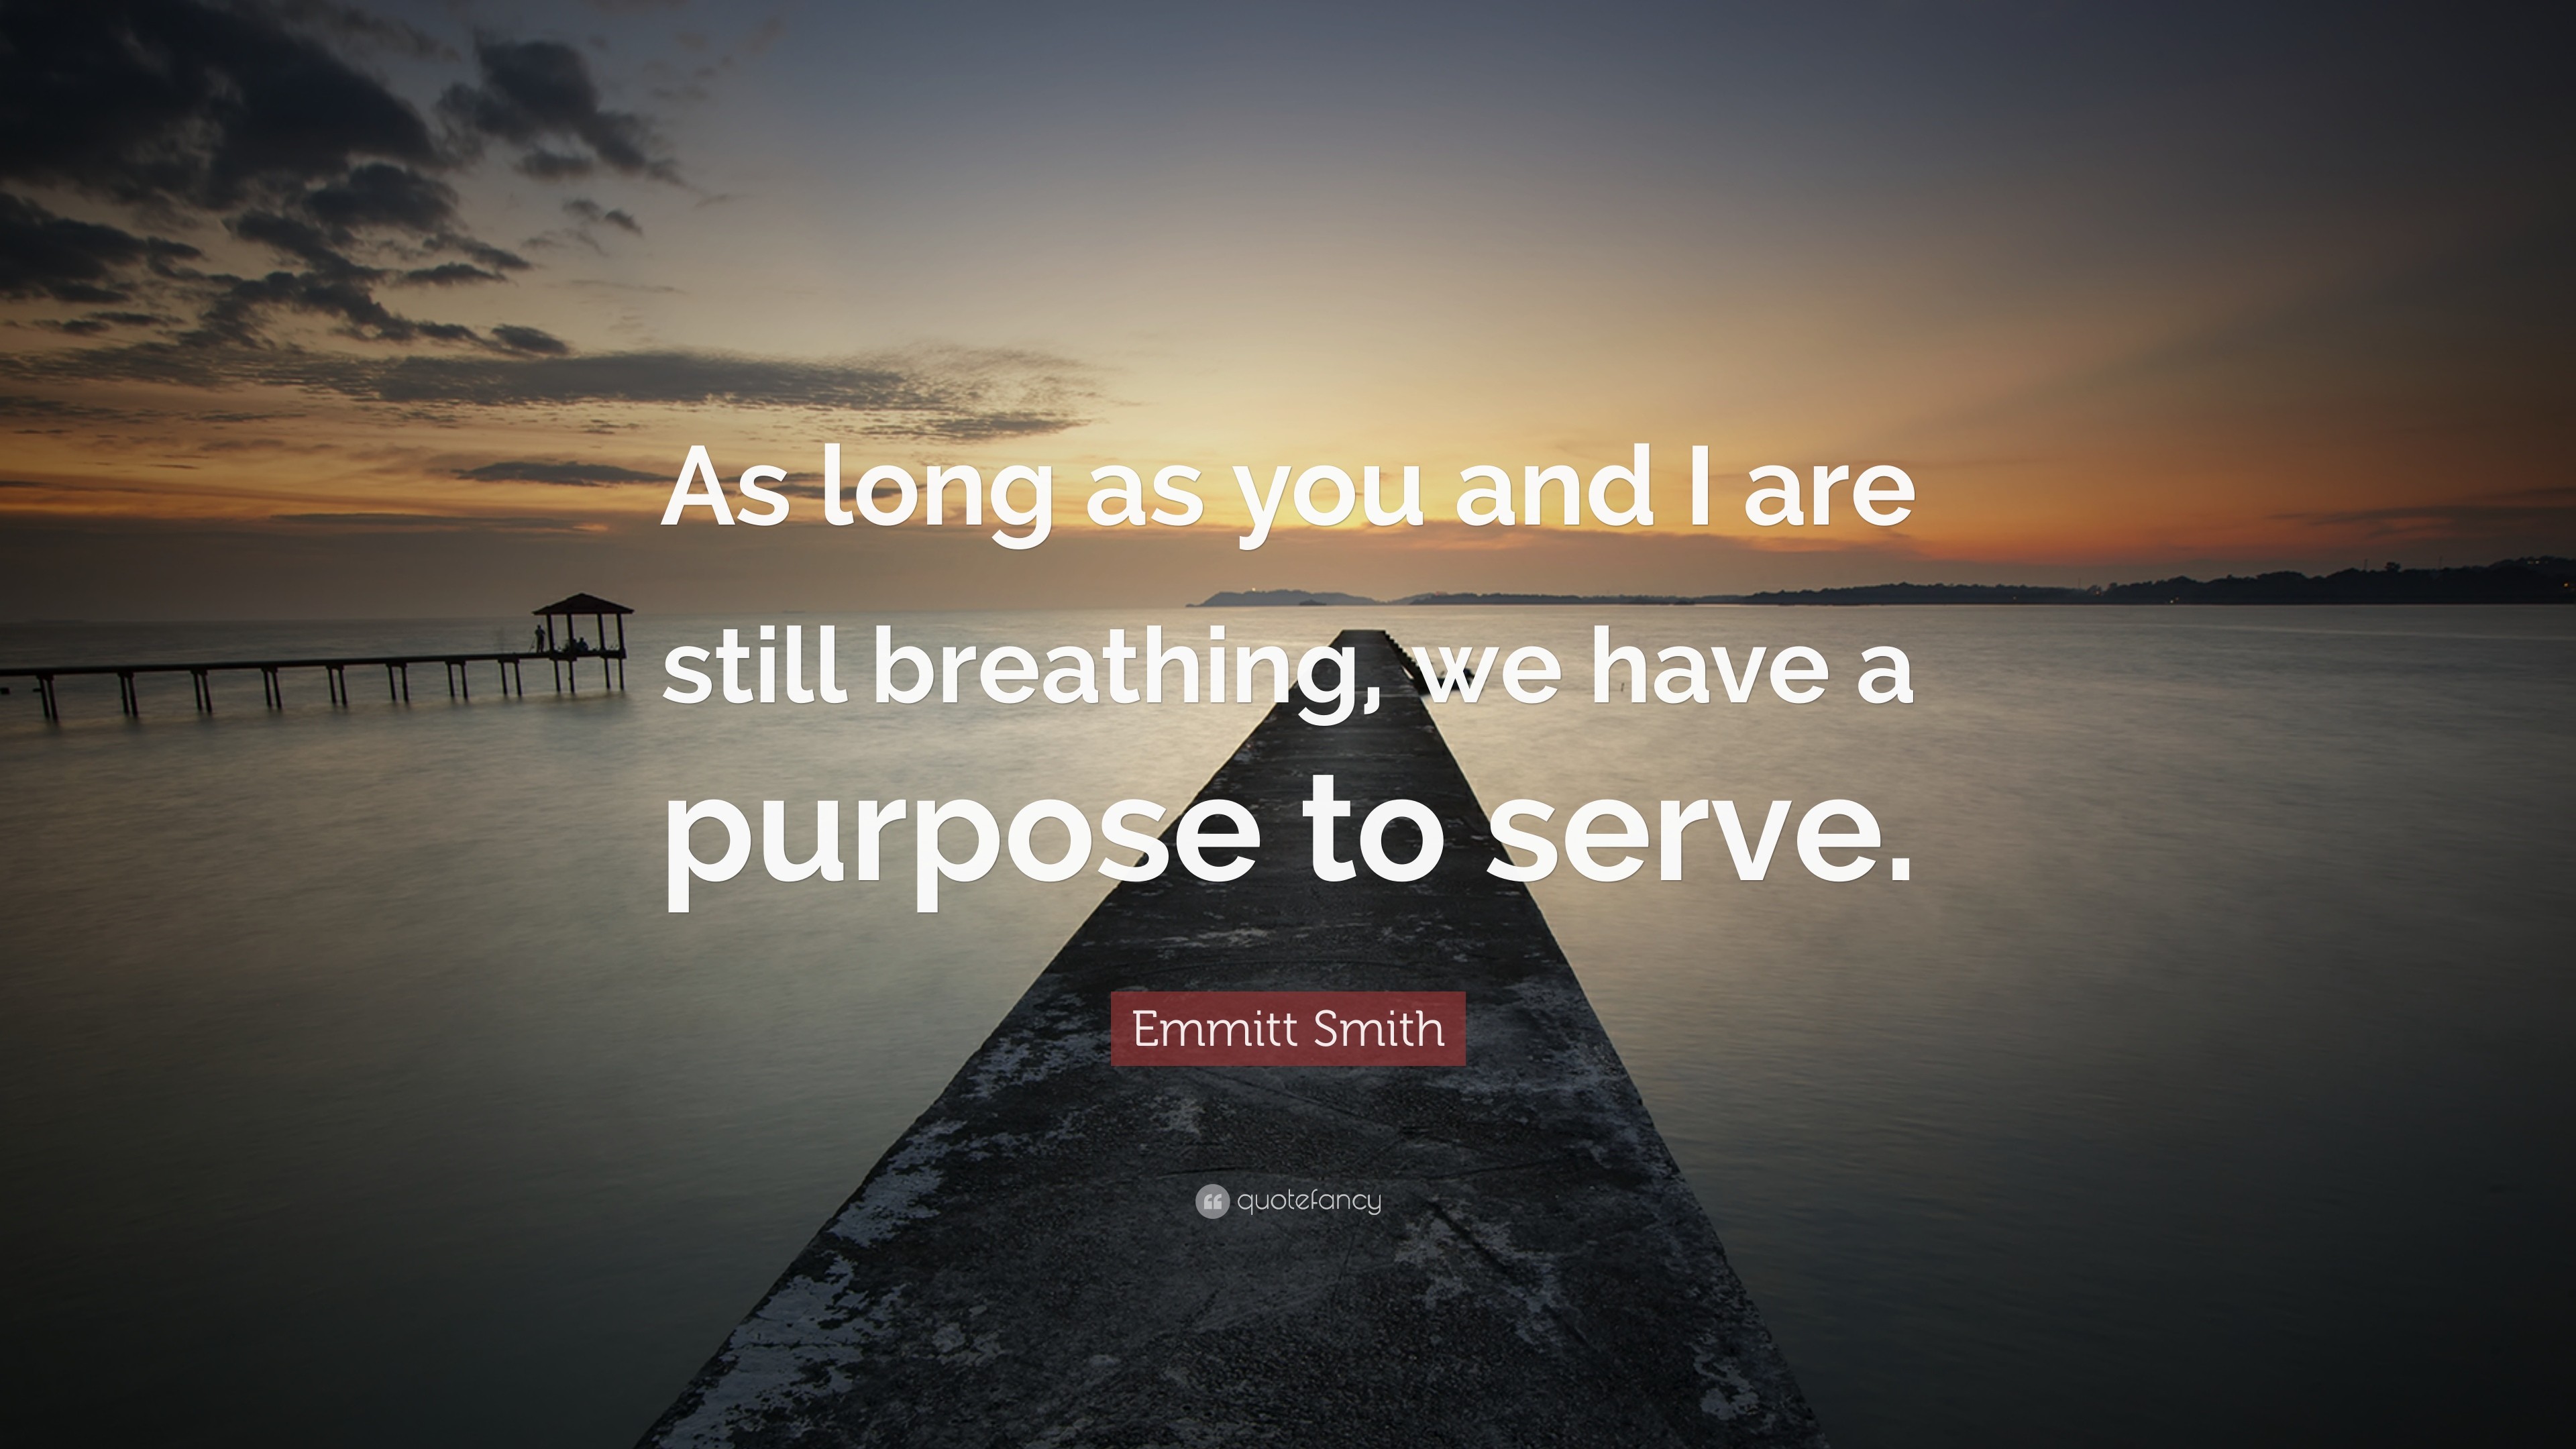 3840x2160 Emmitt Smith Quote: “As long as you and I are still breathing, we